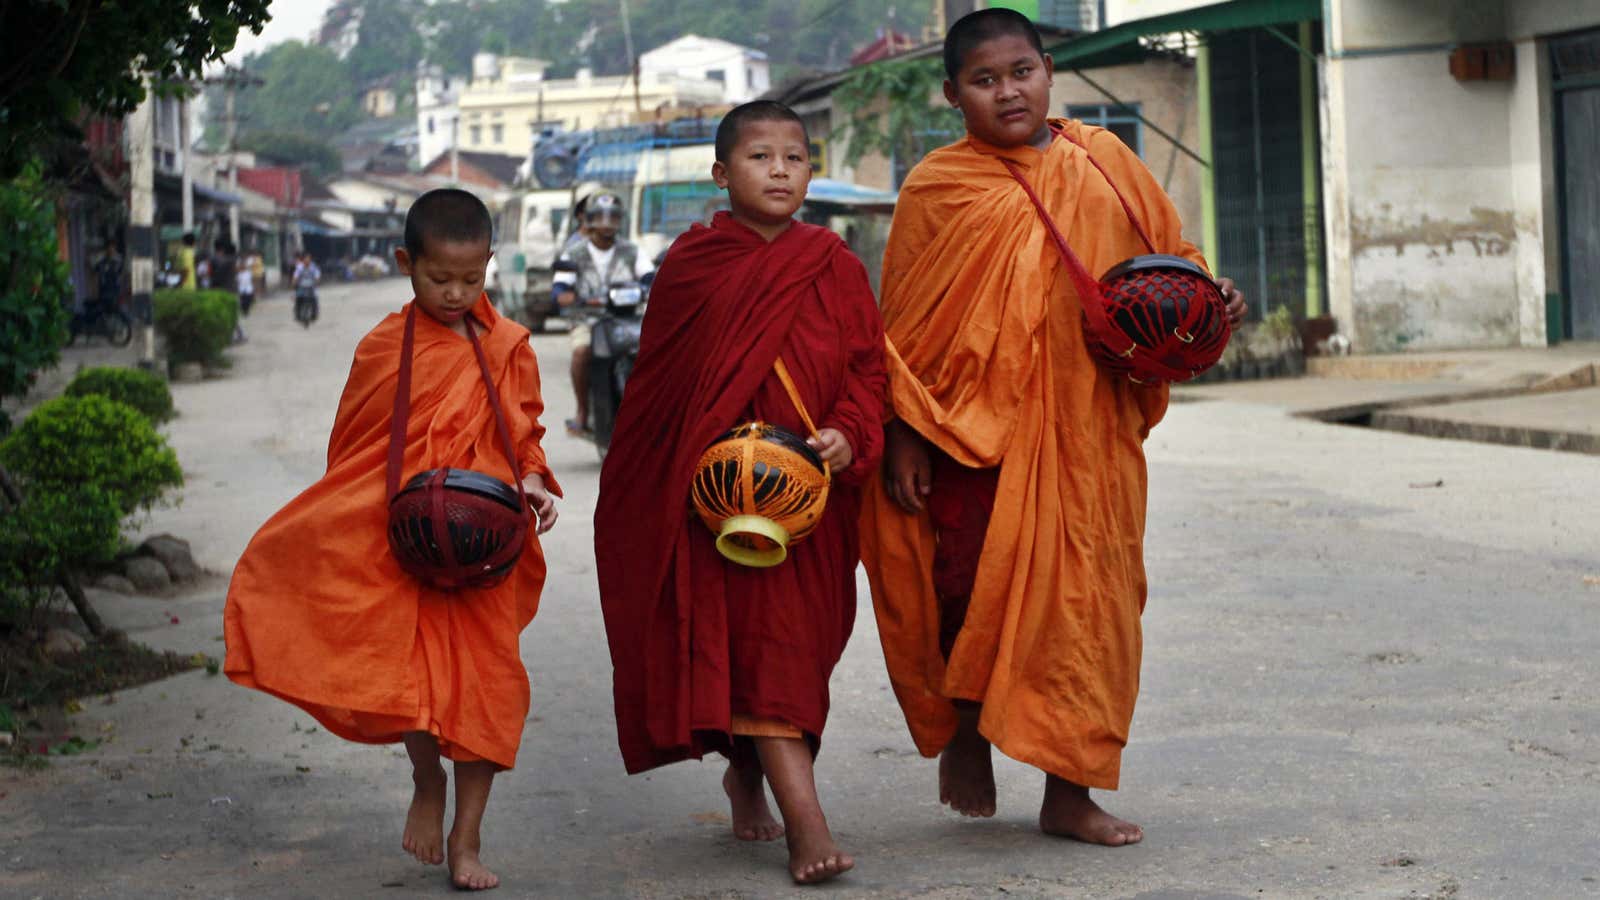 Growing up. At least eight emerging markets are worth watching for their monk-like powers.